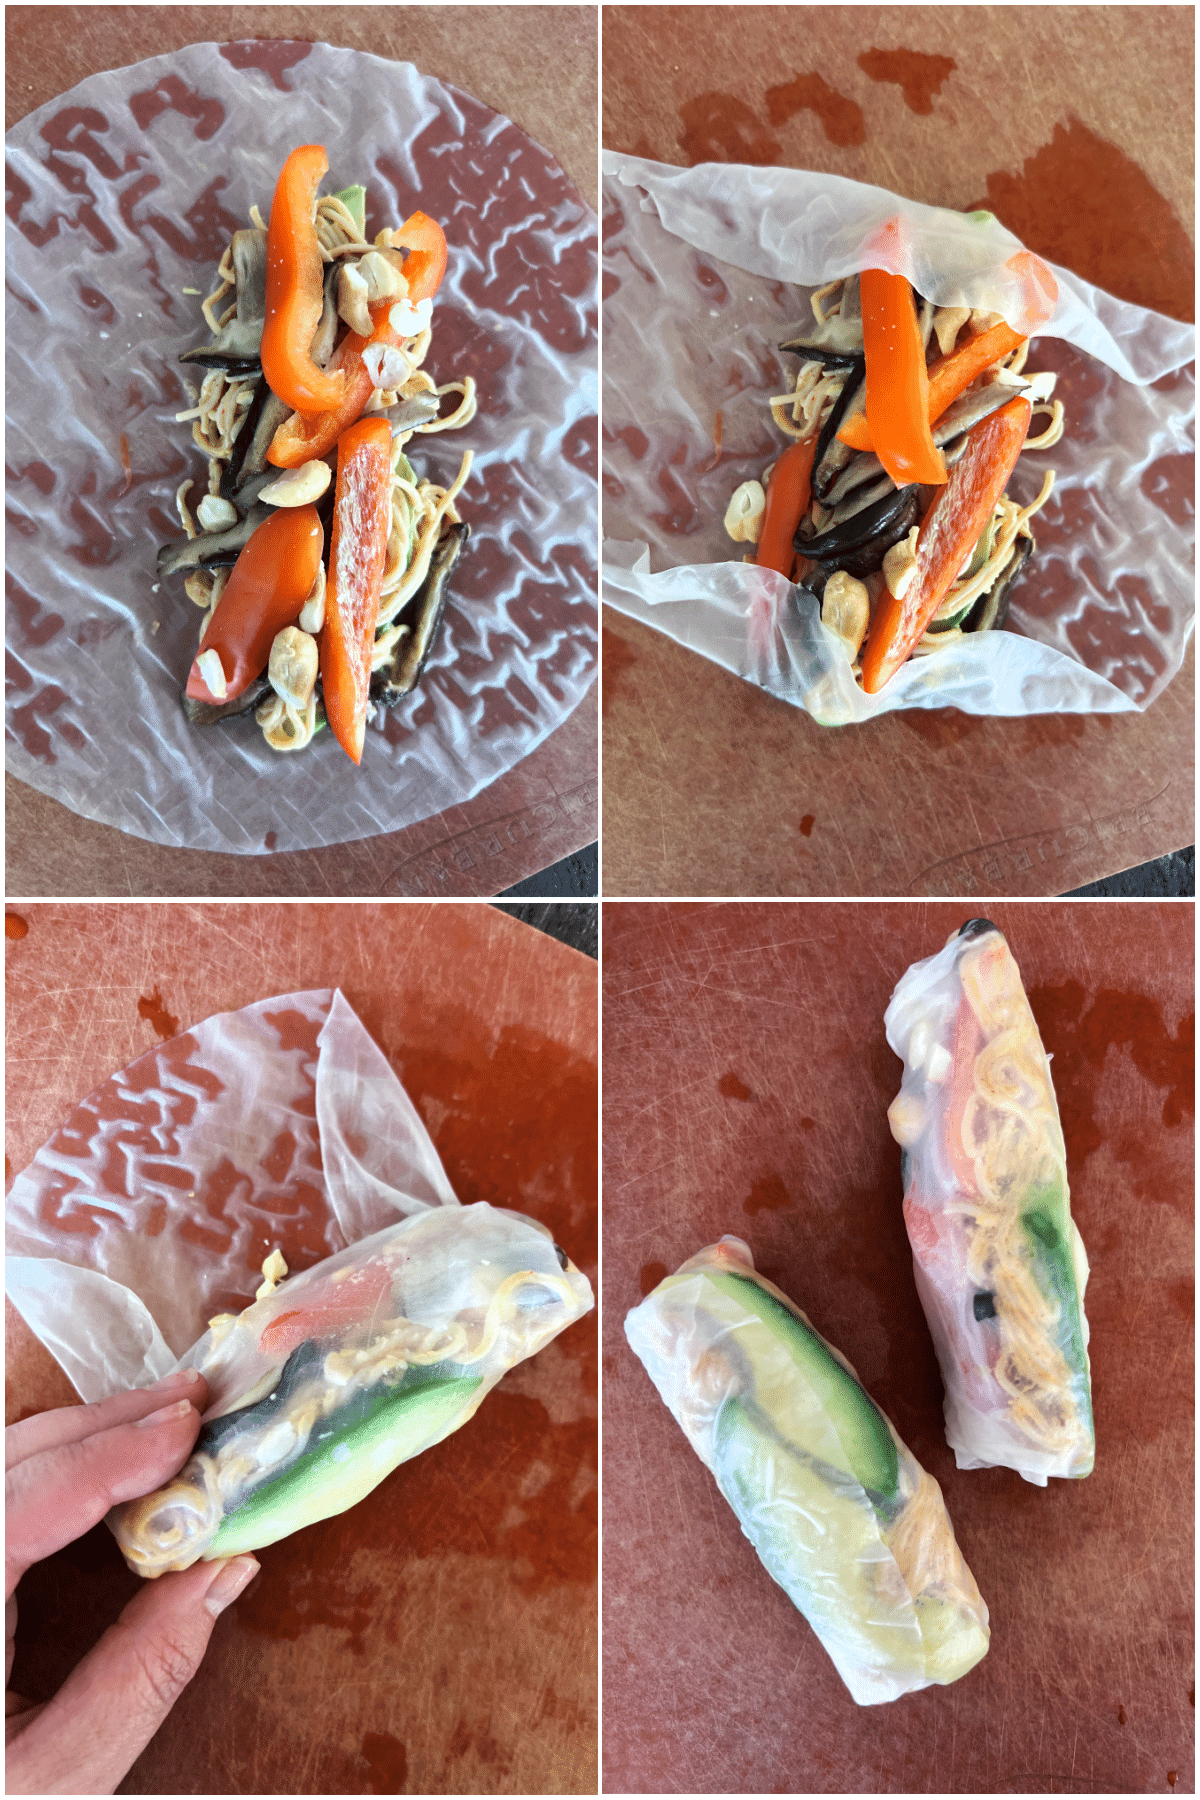 Four image collage showing how to roll spring rolls: line fillings just off center down the middle, fold in short sides first, then fold long side up over fillings and roll tight.